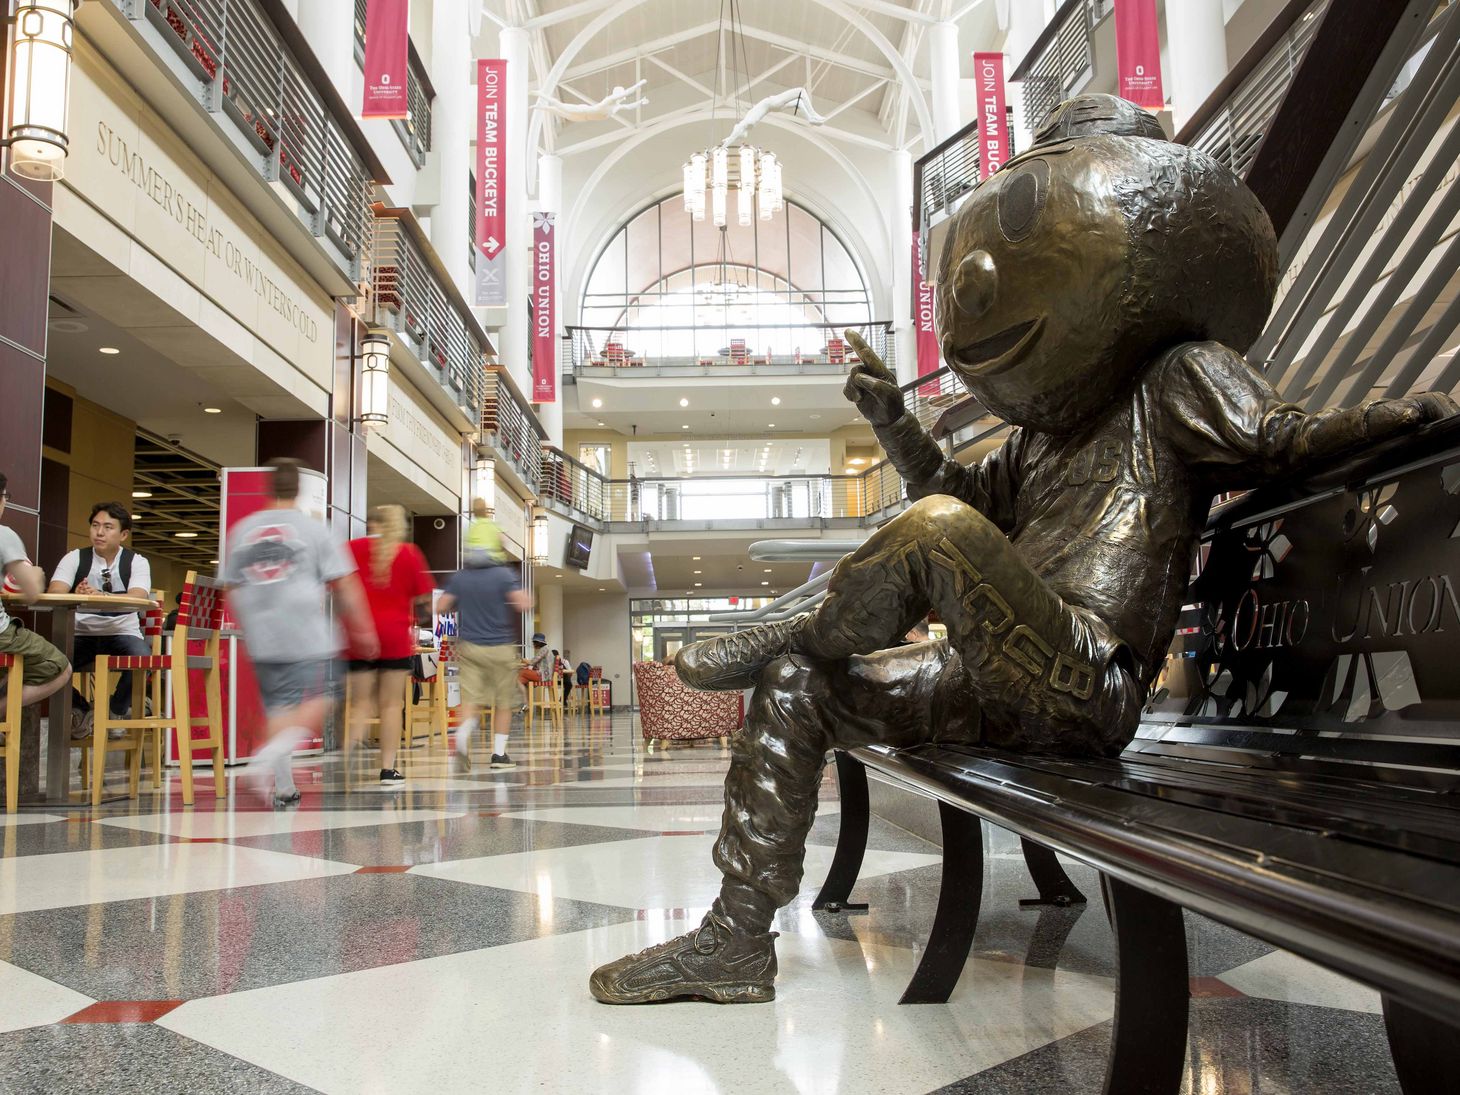 statue of Brutus sitting on a bench in the Ohio Union